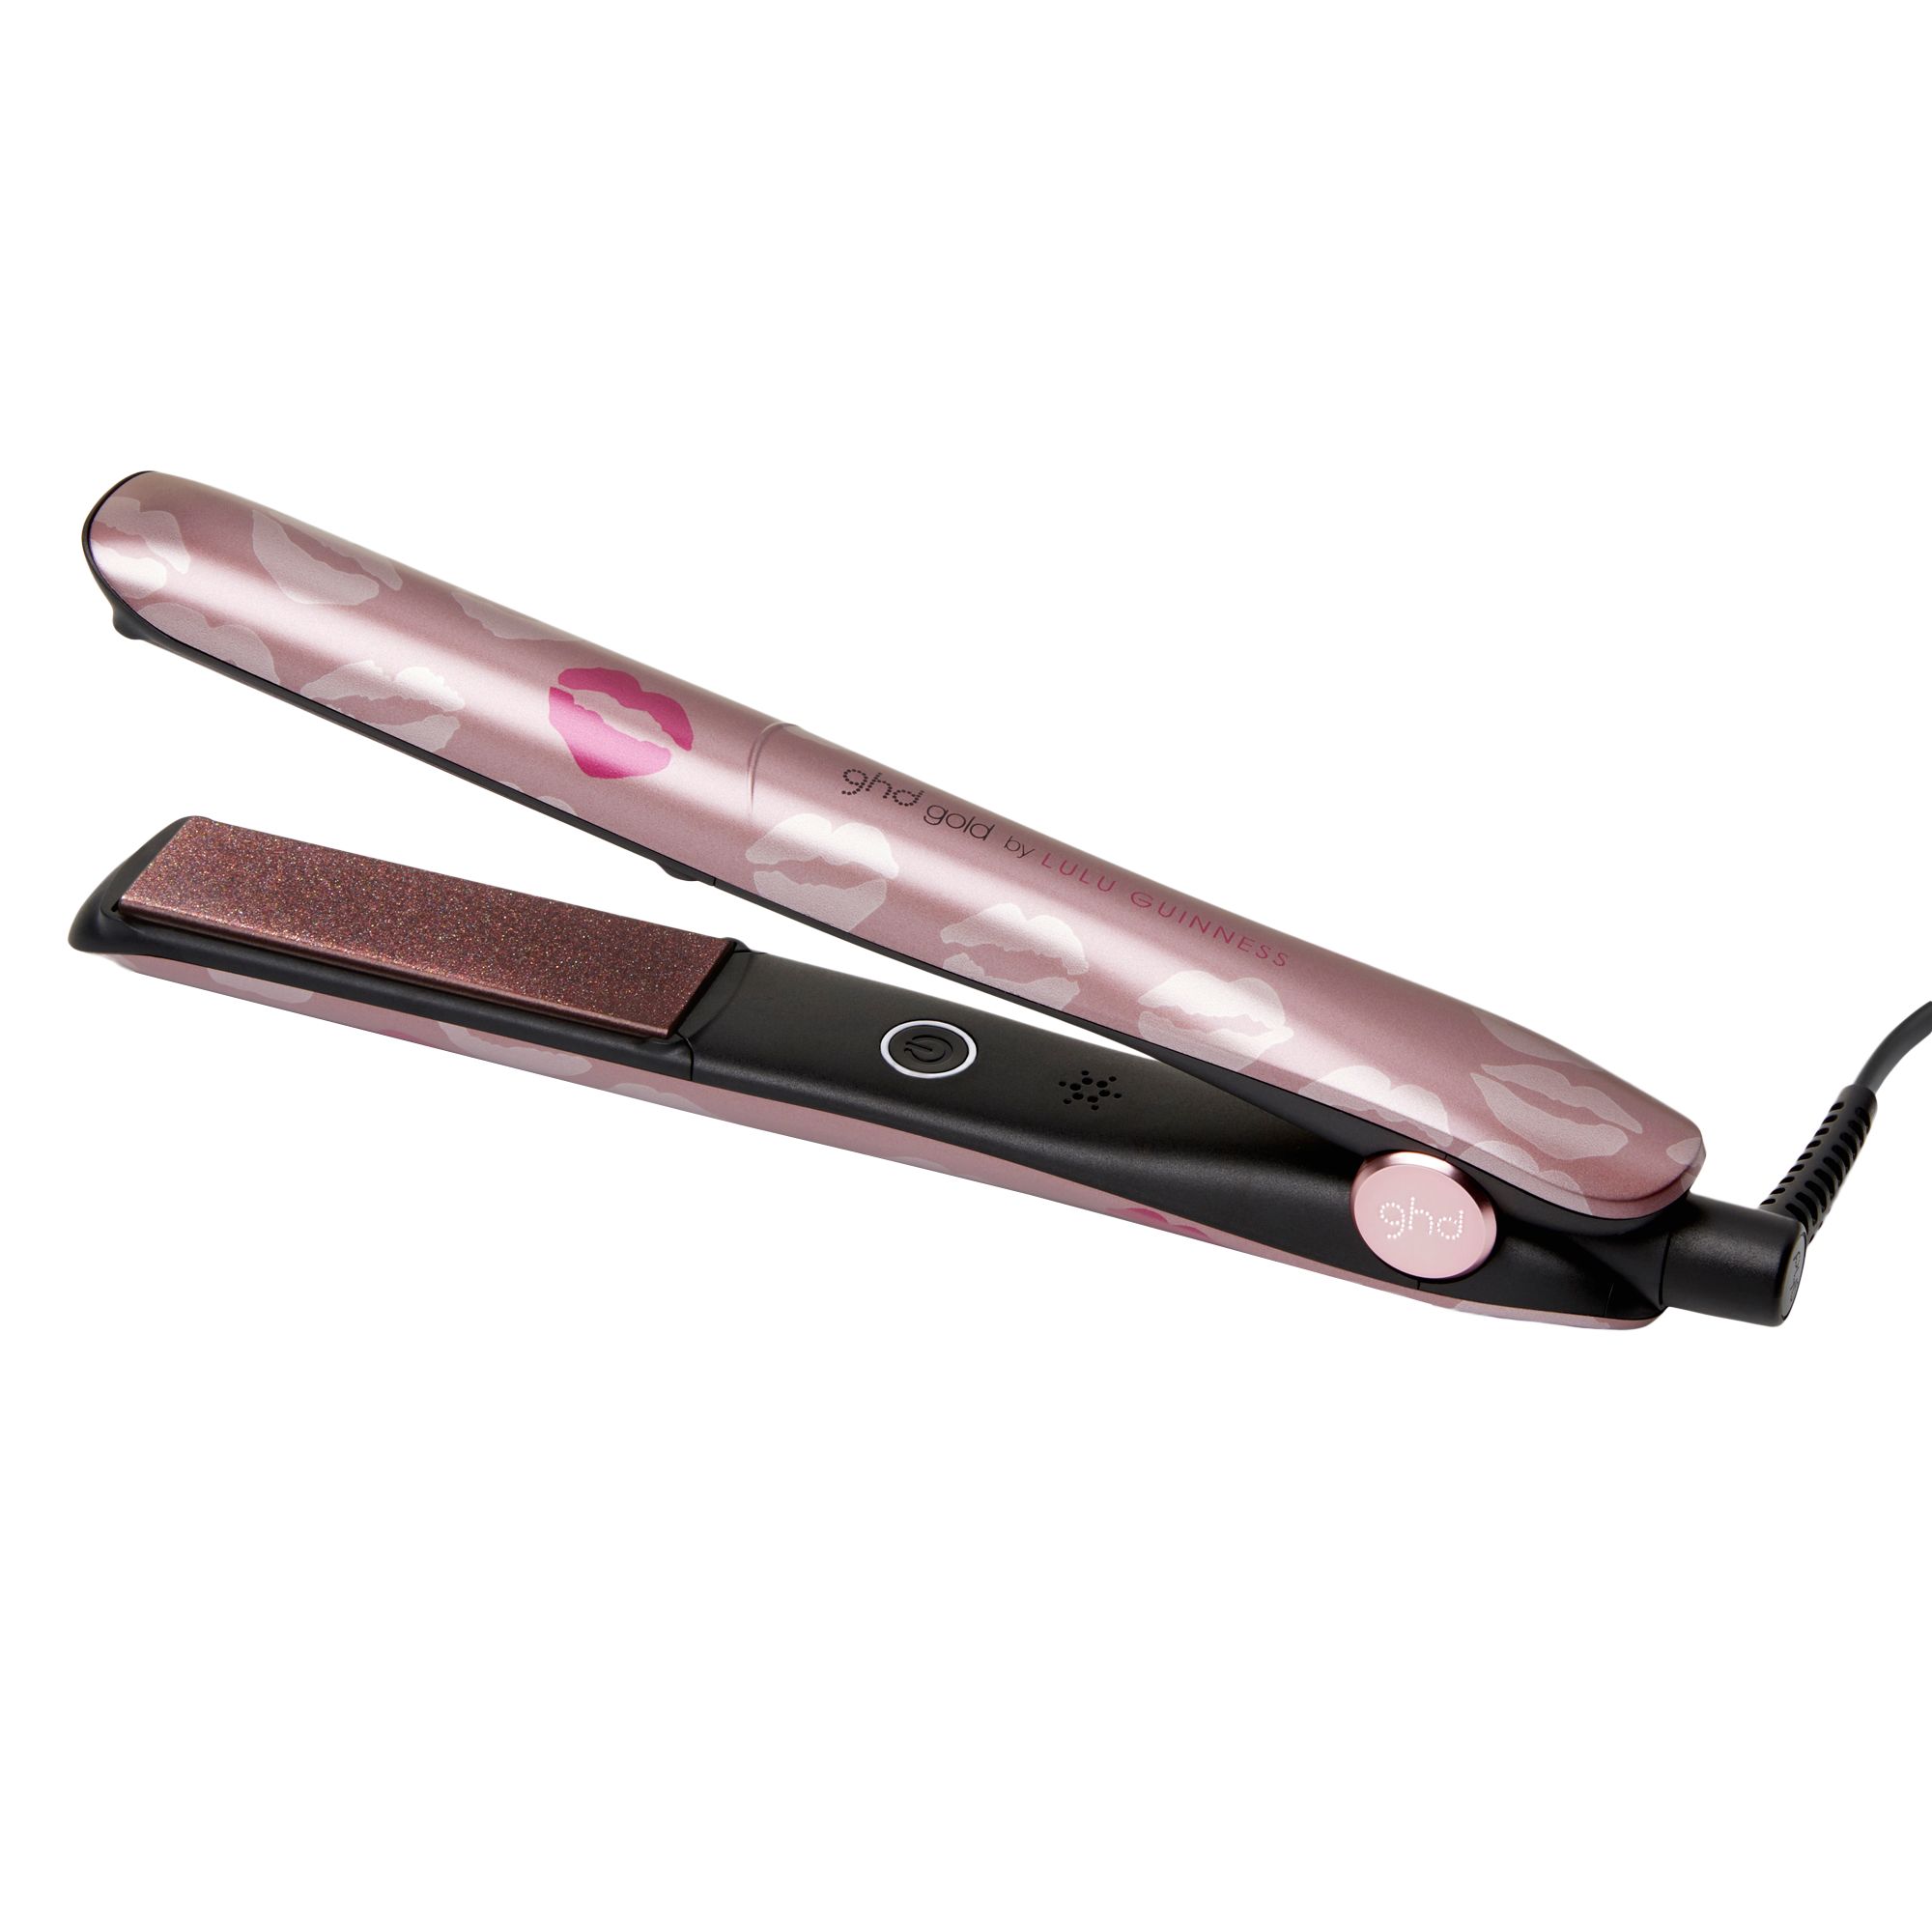 ghd Gold by Lulu Guinness Hair Straightener, Limited Edition